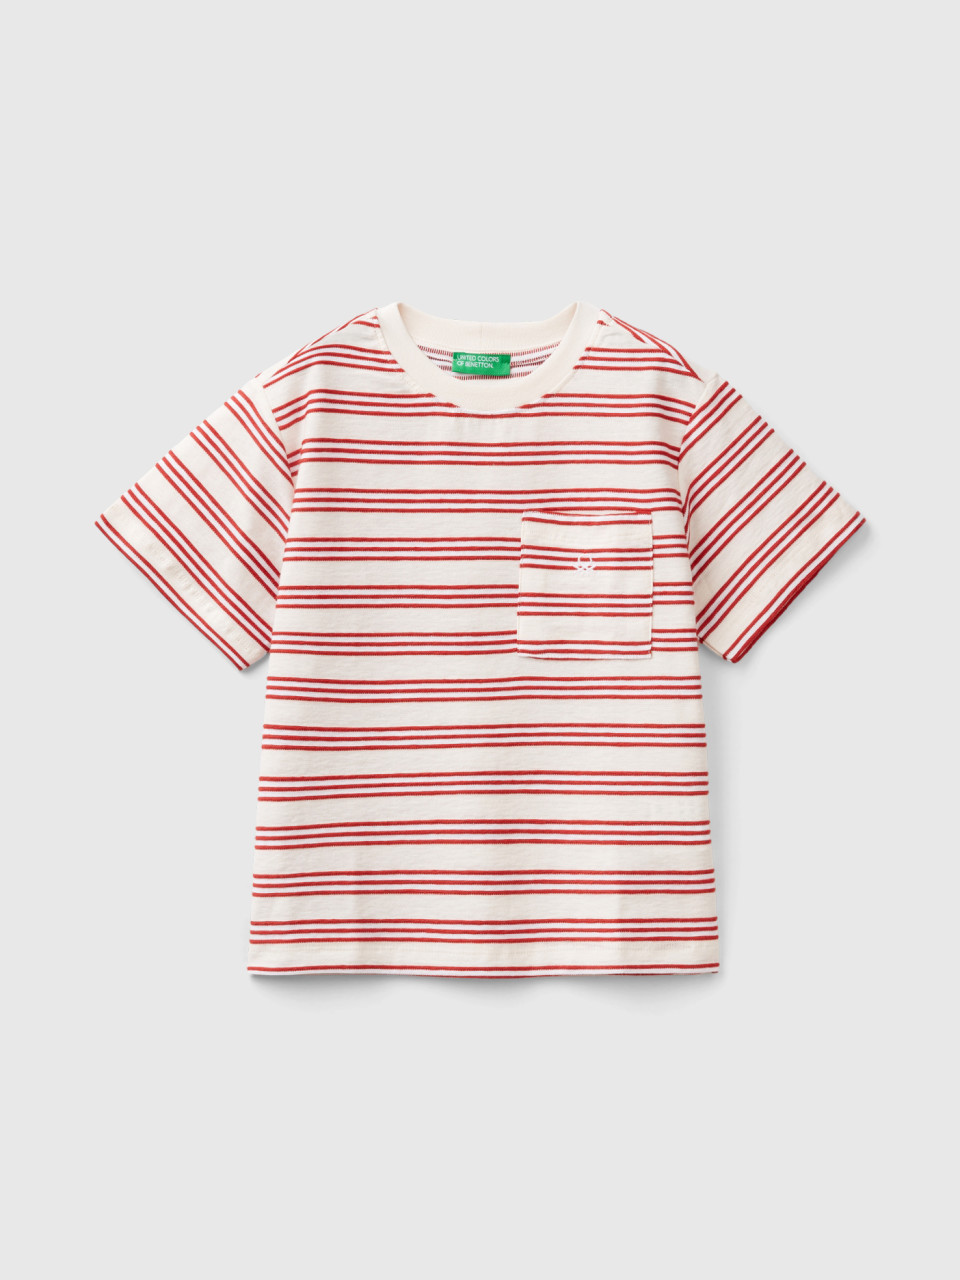 Benetton, Striped T-shirt With Pocket, Red, Kids